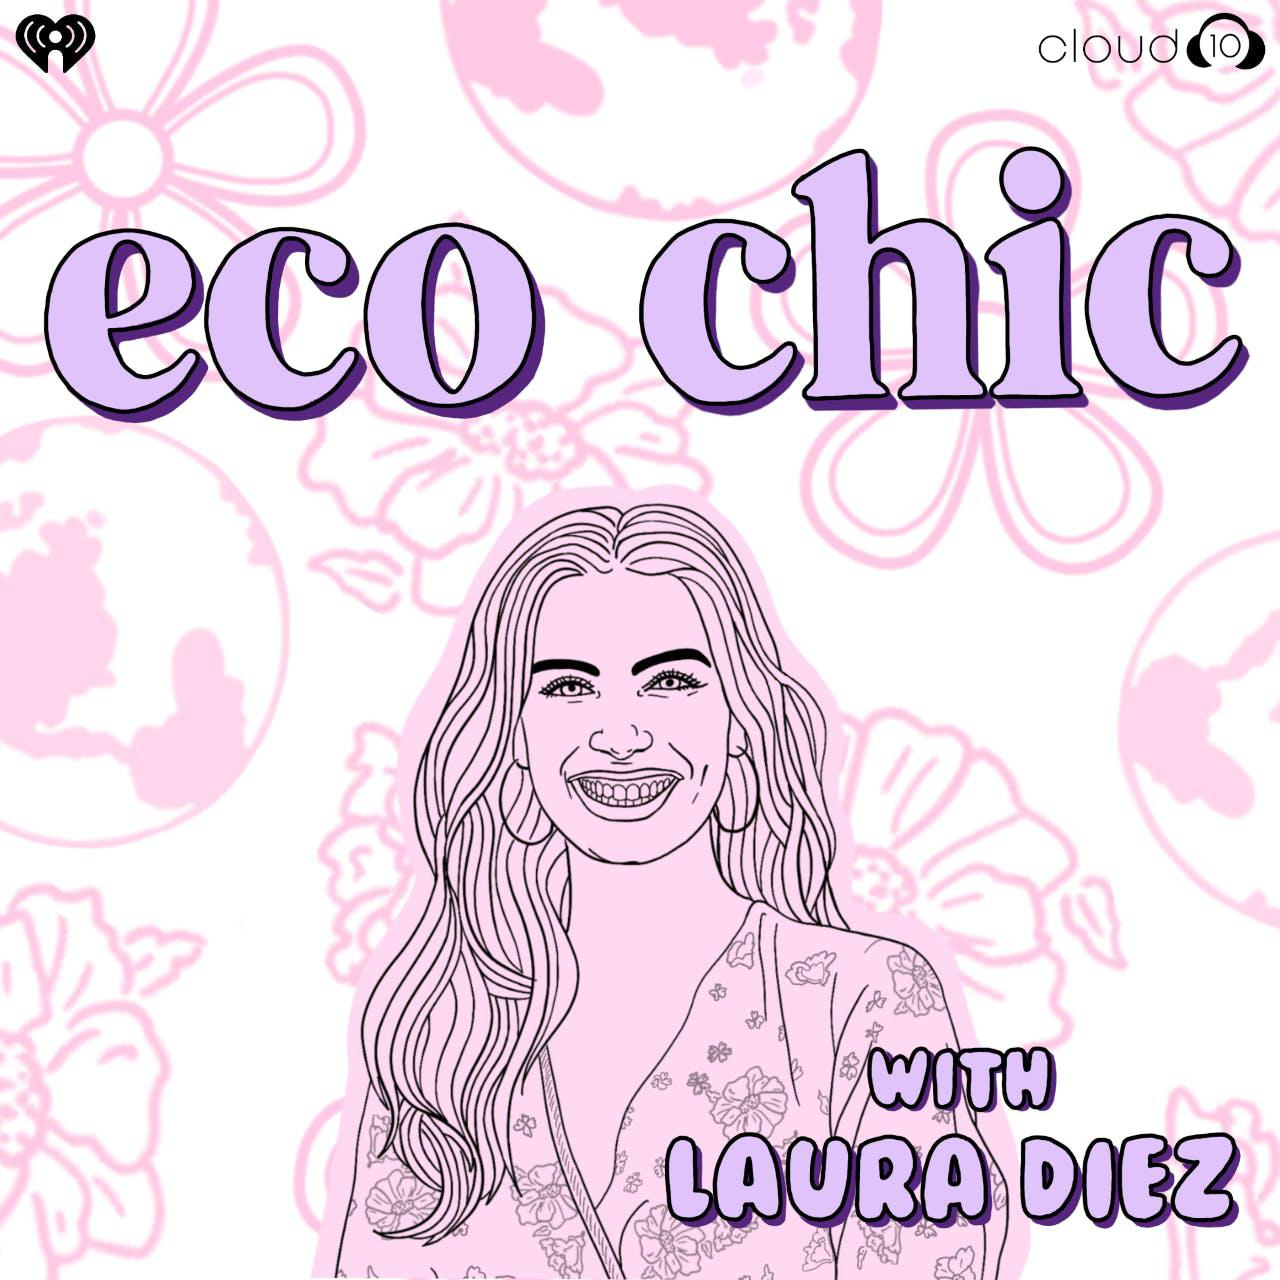 ECO CHIC (podcast) - Cloud10 and iHeartPodcasts | Listen Notes